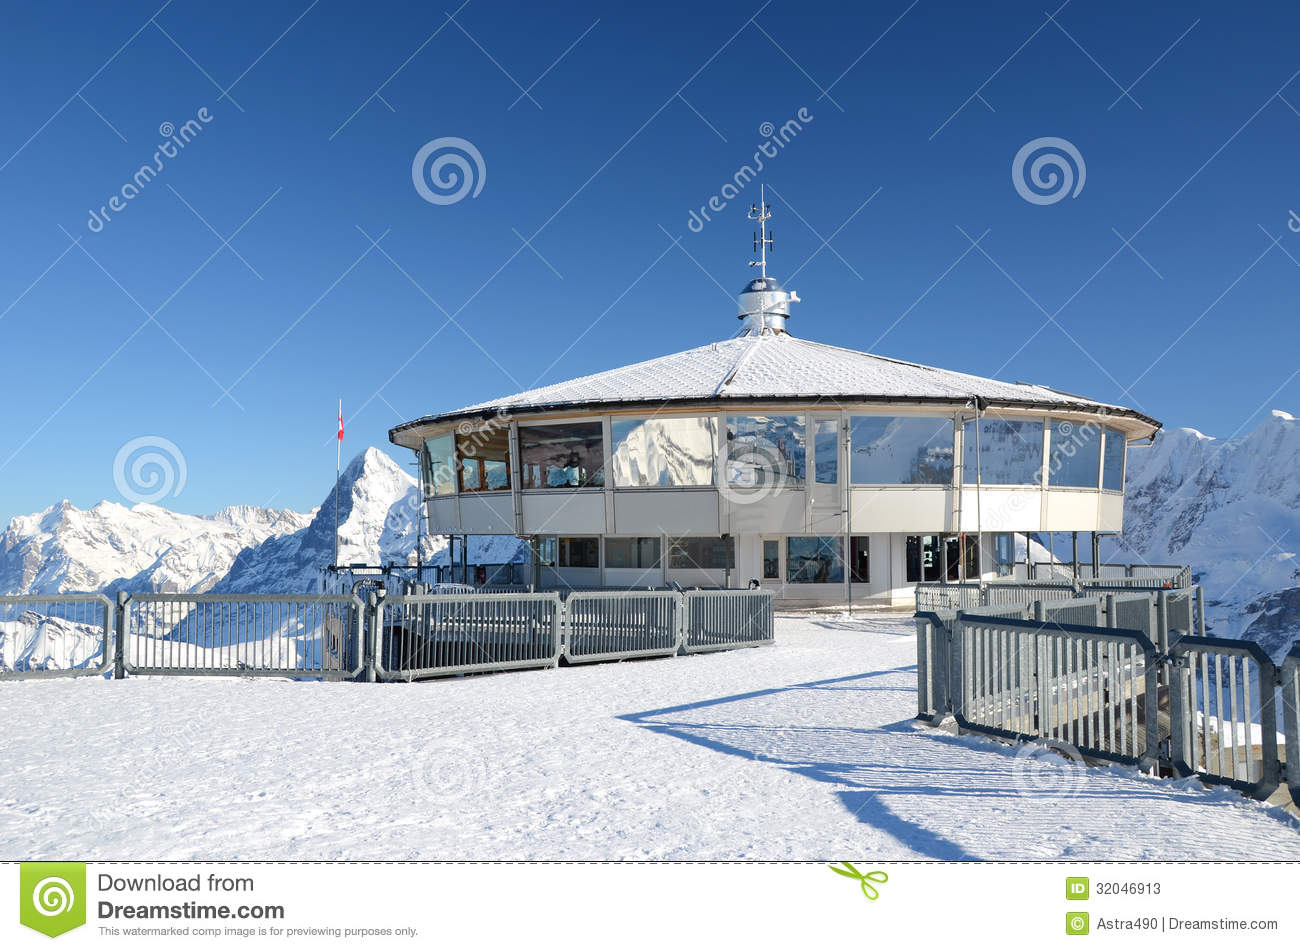 Schilthorn Mountain clipart #19, Download drawings